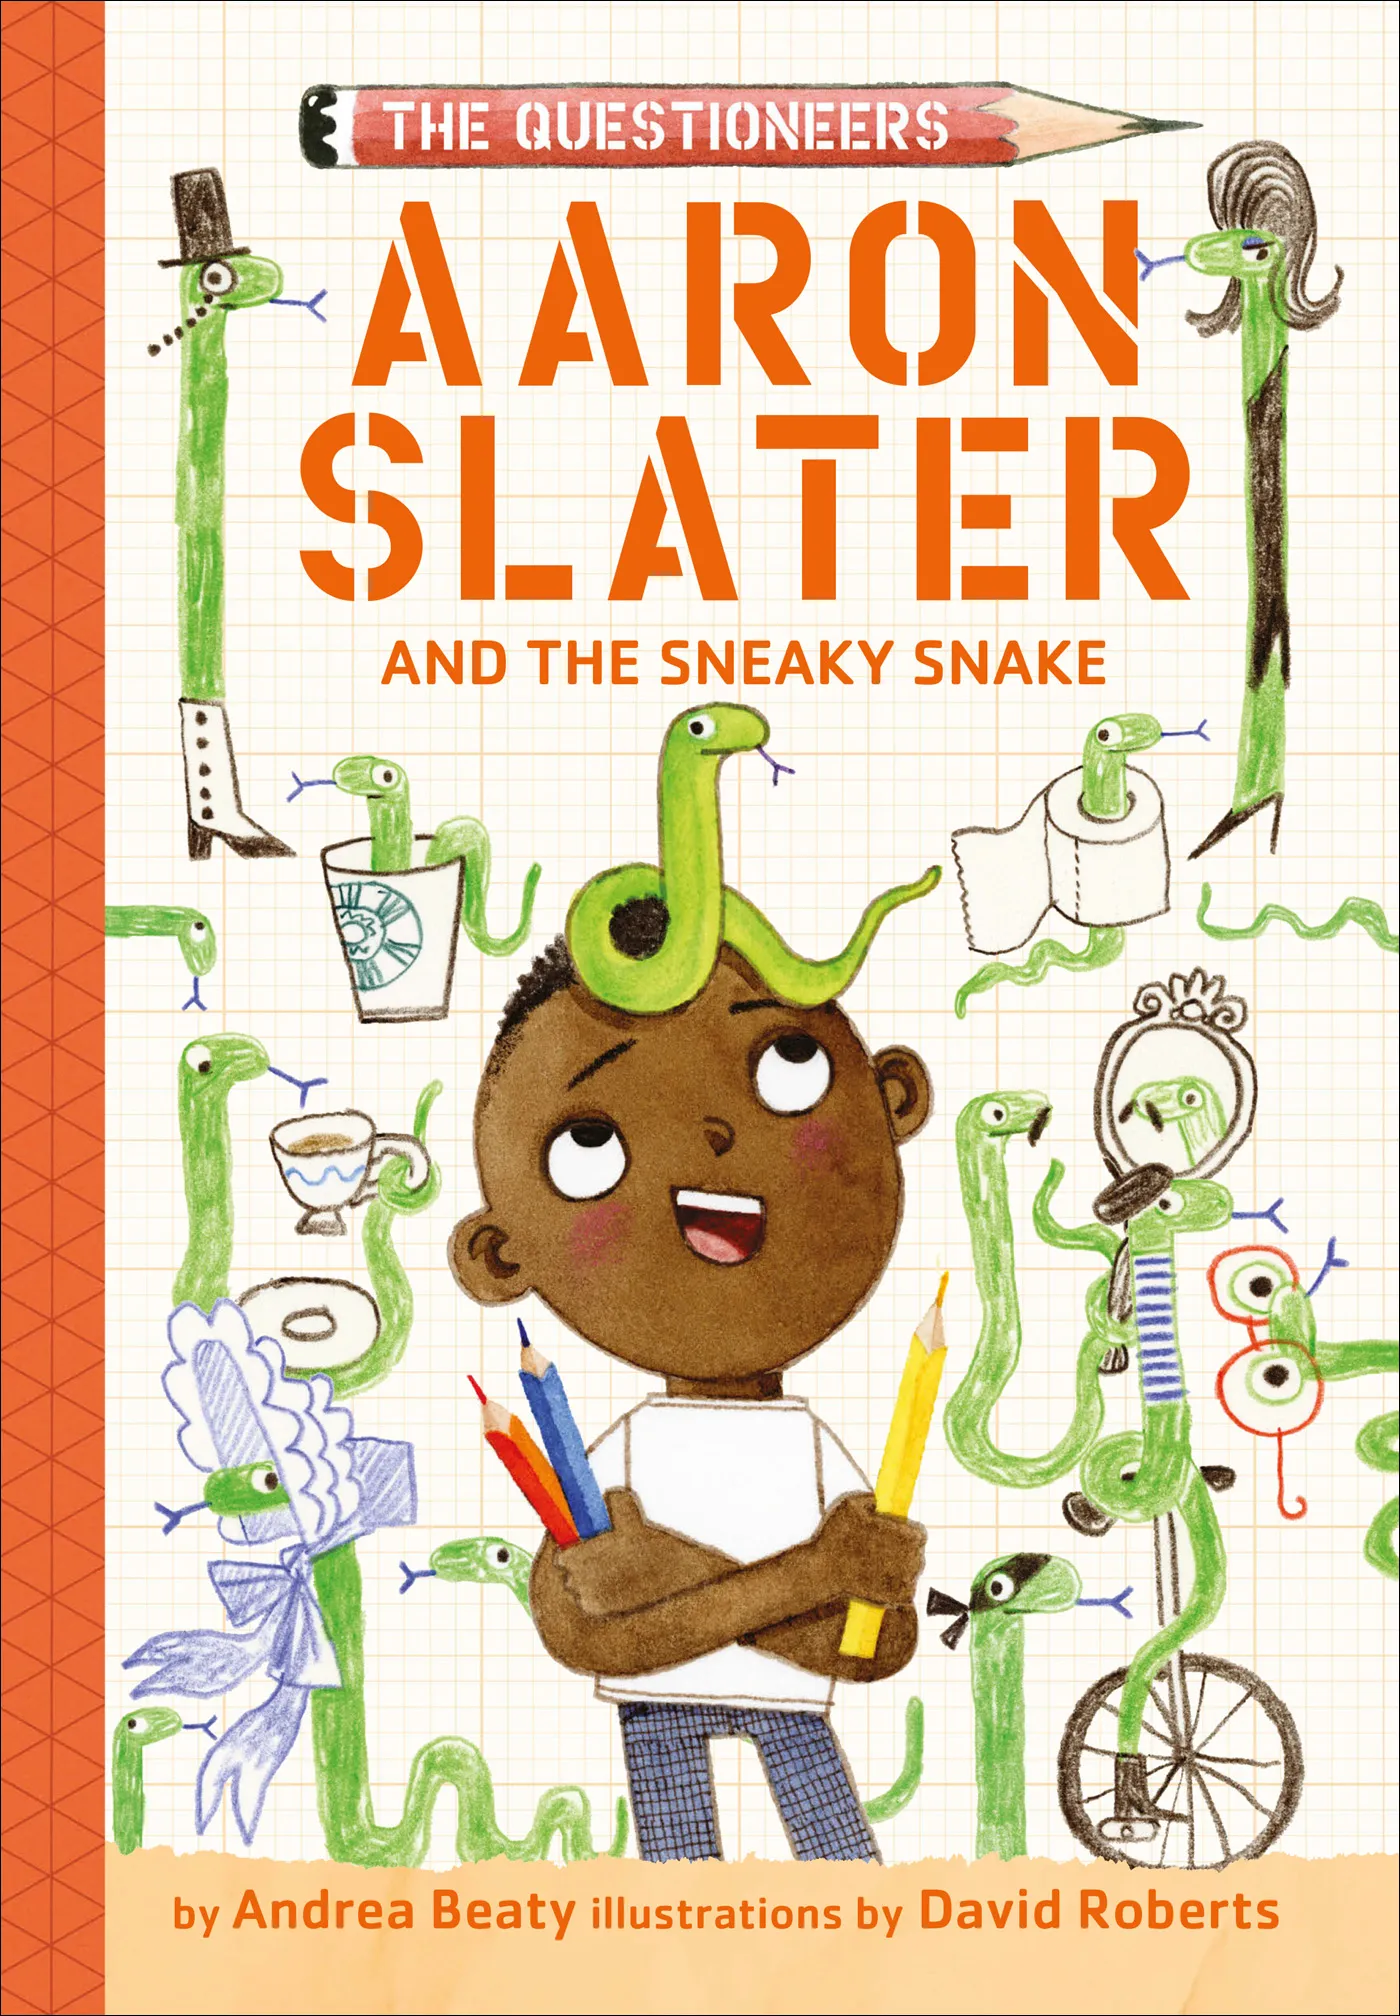 Aaron Slater and the Sneaky Snake (The Questioneers #6)